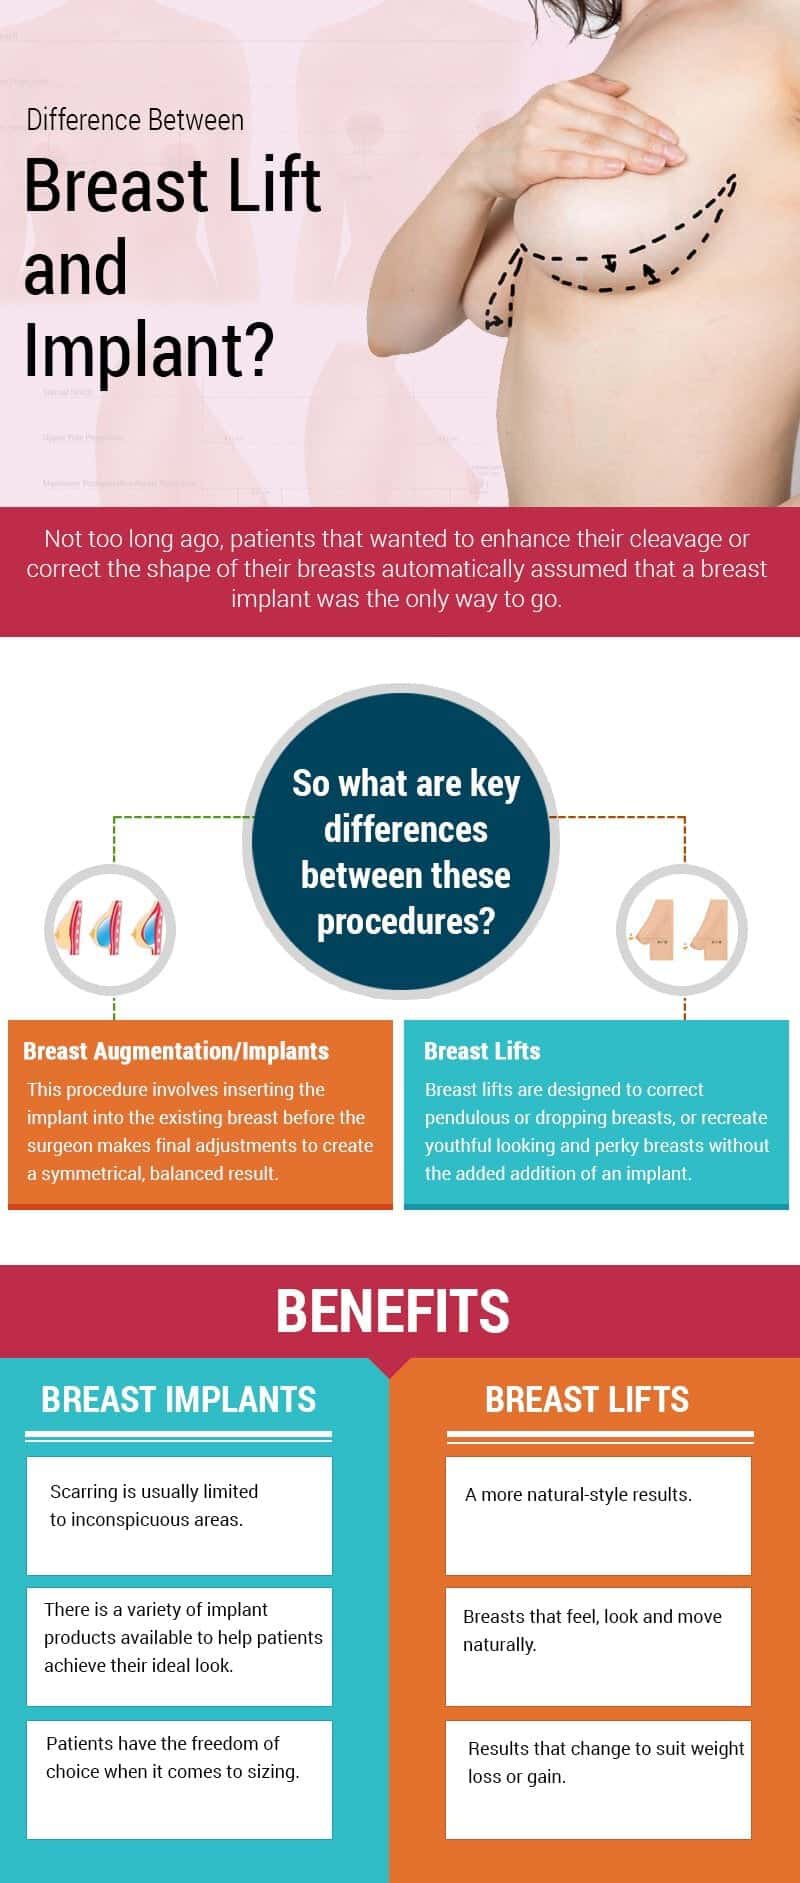 Difference Between Breast Lift and Implant? Not too long ago, patients that wanted to enhance their cleavage or correct the shape of their breasts automatically assumed that a breast implant was the only way to go. So what are the key differences between these procedures? Breast Augmentation/Implant: this procedure involves inserting the implant into the existing breast before the surgeon makes final adjustments to create a symmetrical, balanced result. Breast Lift are designed to correct pendulous or dropping breasts, or recreate youthful looking and perky breasts without the added addition of an implant. Benefits of Breast implants scaring is usually limited to areas, there is a variety of implant products available to help patients acheive their ideal look. Patients have the freedom of choice when it comes to sizing. Benefits of breast lift are more natually style results, breasts feel, look and move more natural, results that change to a suit weight loss or gain.